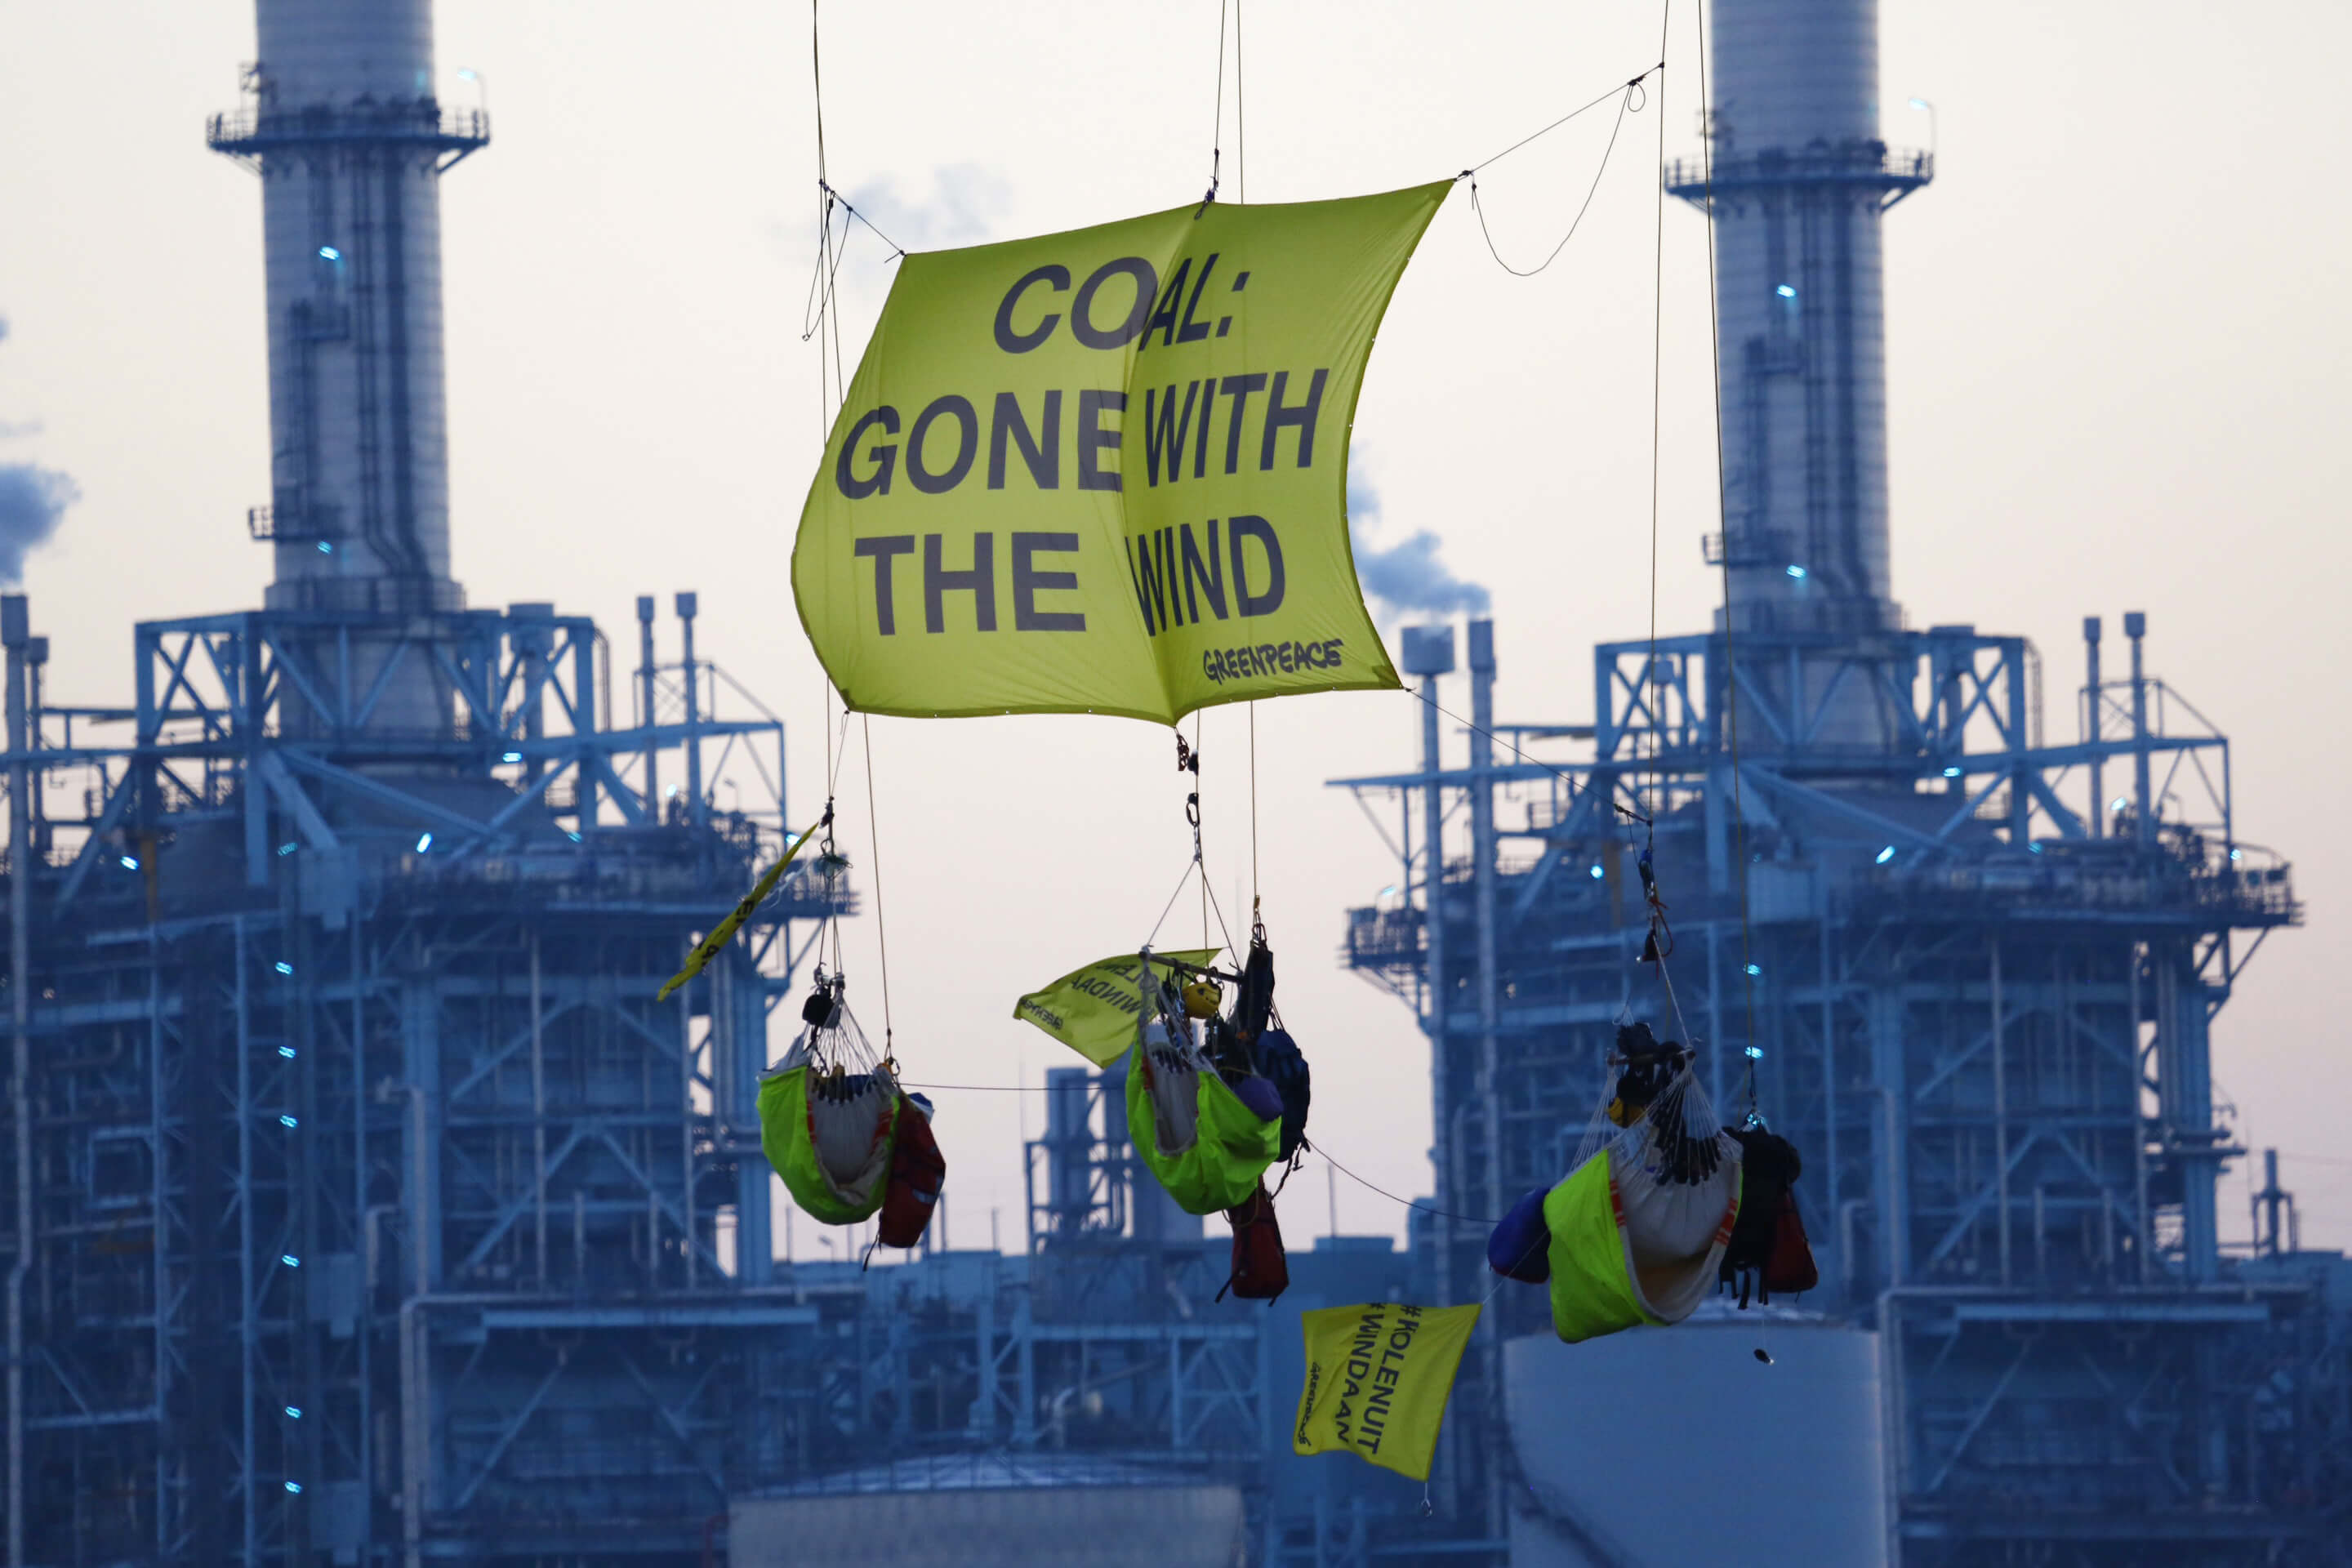 Blockade of the Essent coal-fired power plant in 2016 by Greenpeace. © Greenpeace Nederland / Flickr